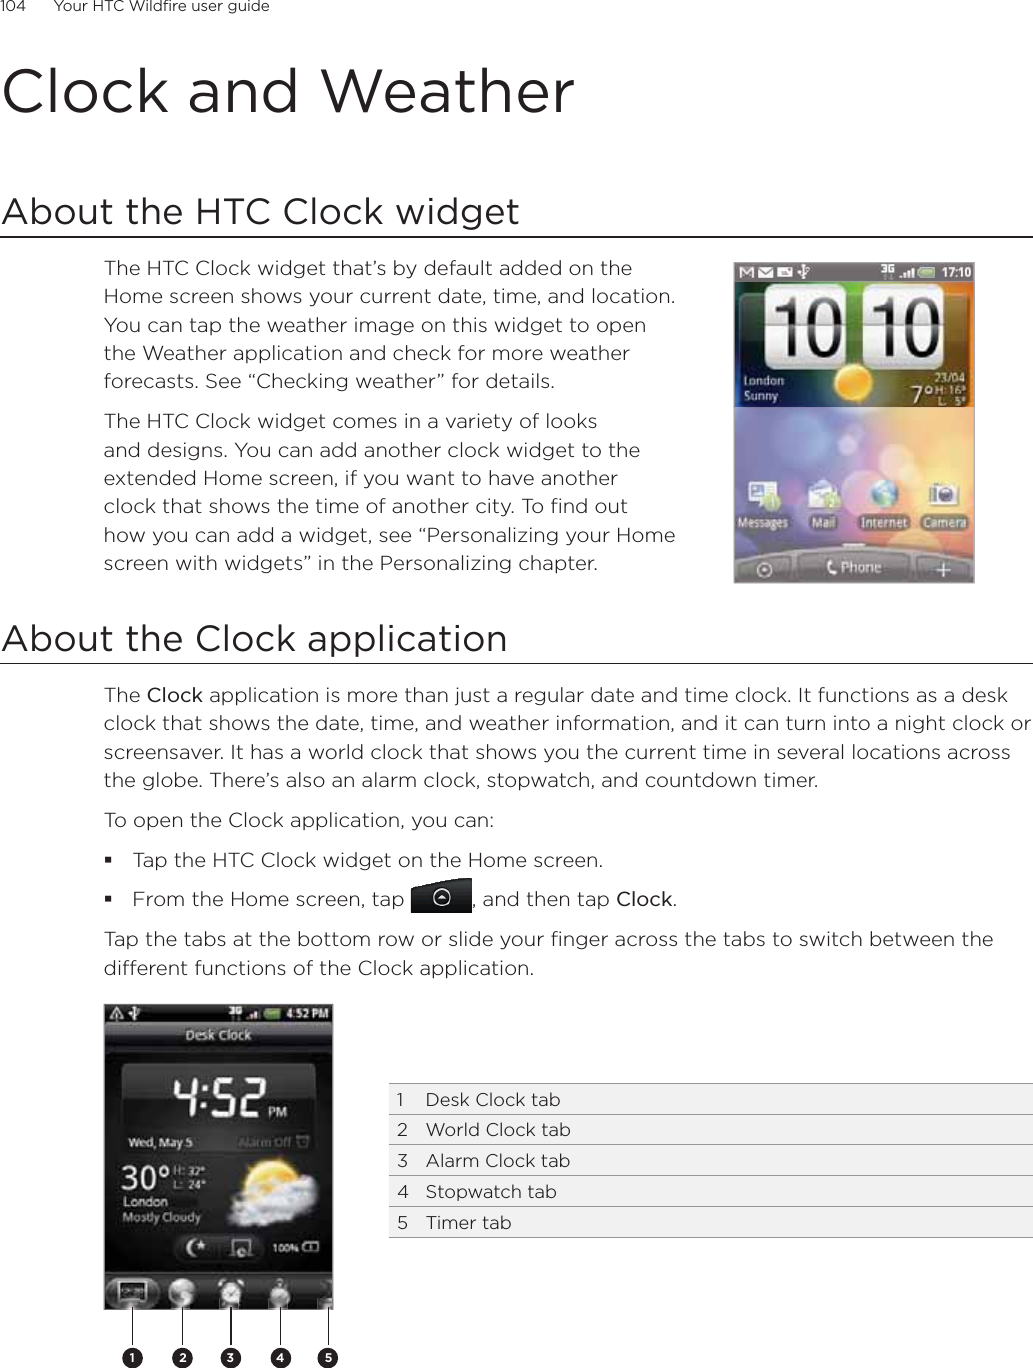 104      Your HTC Wildfire user guide      Clock and WeatherAbout the HTC Clock widgetThe HTC Clock widget that’s by default added on the Home screen shows your current date, time, and location. You can tap the weather image on this widget to open the Weather application and check for more weather forecasts. See “Checking weather” for details.The HTC Clock widget comes in a variety of looks and designs. You can add another clock widget to the extended Home screen, if you want to have another clock that shows the time of another city. To find out how you can add a widget, see “Personalizing your Home screen with widgets” in the Personalizing chapter.About the Clock applicationThe Clock application is more than just a regular date and time clock. It functions as a desk clock that shows the date, time, and weather information, and it can turn into a night clock or screensaver. It has a world clock that shows you the current time in several locations across the globe. There’s also an alarm clock, stopwatch, and countdown timer.To open the Clock application, you can:Tap the HTC Clock widget on the Home screen.From the Home screen, tap , and then tap Clock.Tap the tabs at the bottom row or slide your finger across the tabs to switch between the different functions of the Clock application.2 3 4511  Desk Clock tab2  World Clock tab3  Alarm Clock tab4 Stopwatch tab5 Timer tab